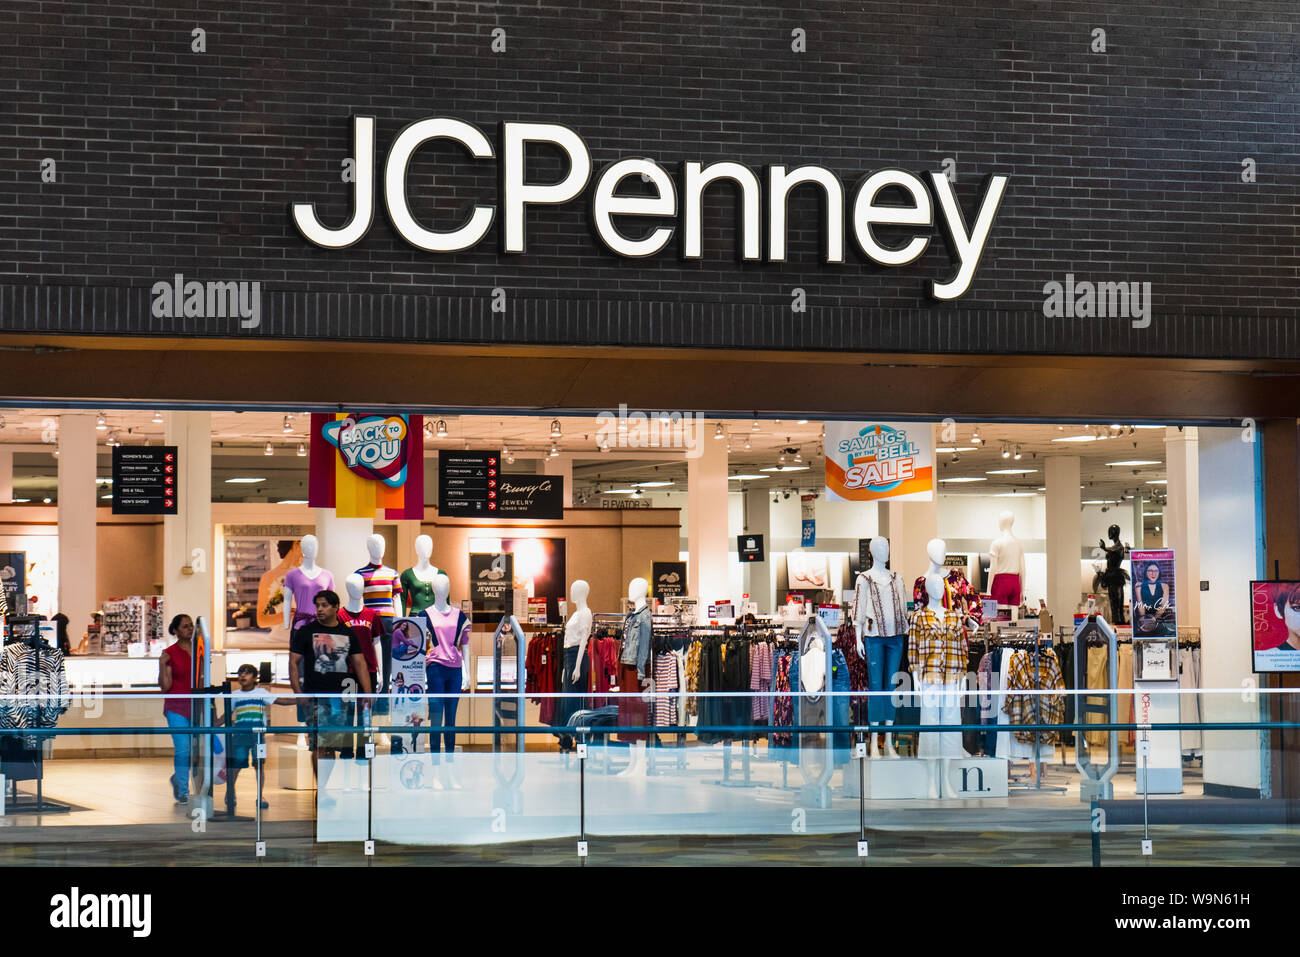 jcpenney.scene7.com/is/image/JCPenney/DP0825202015